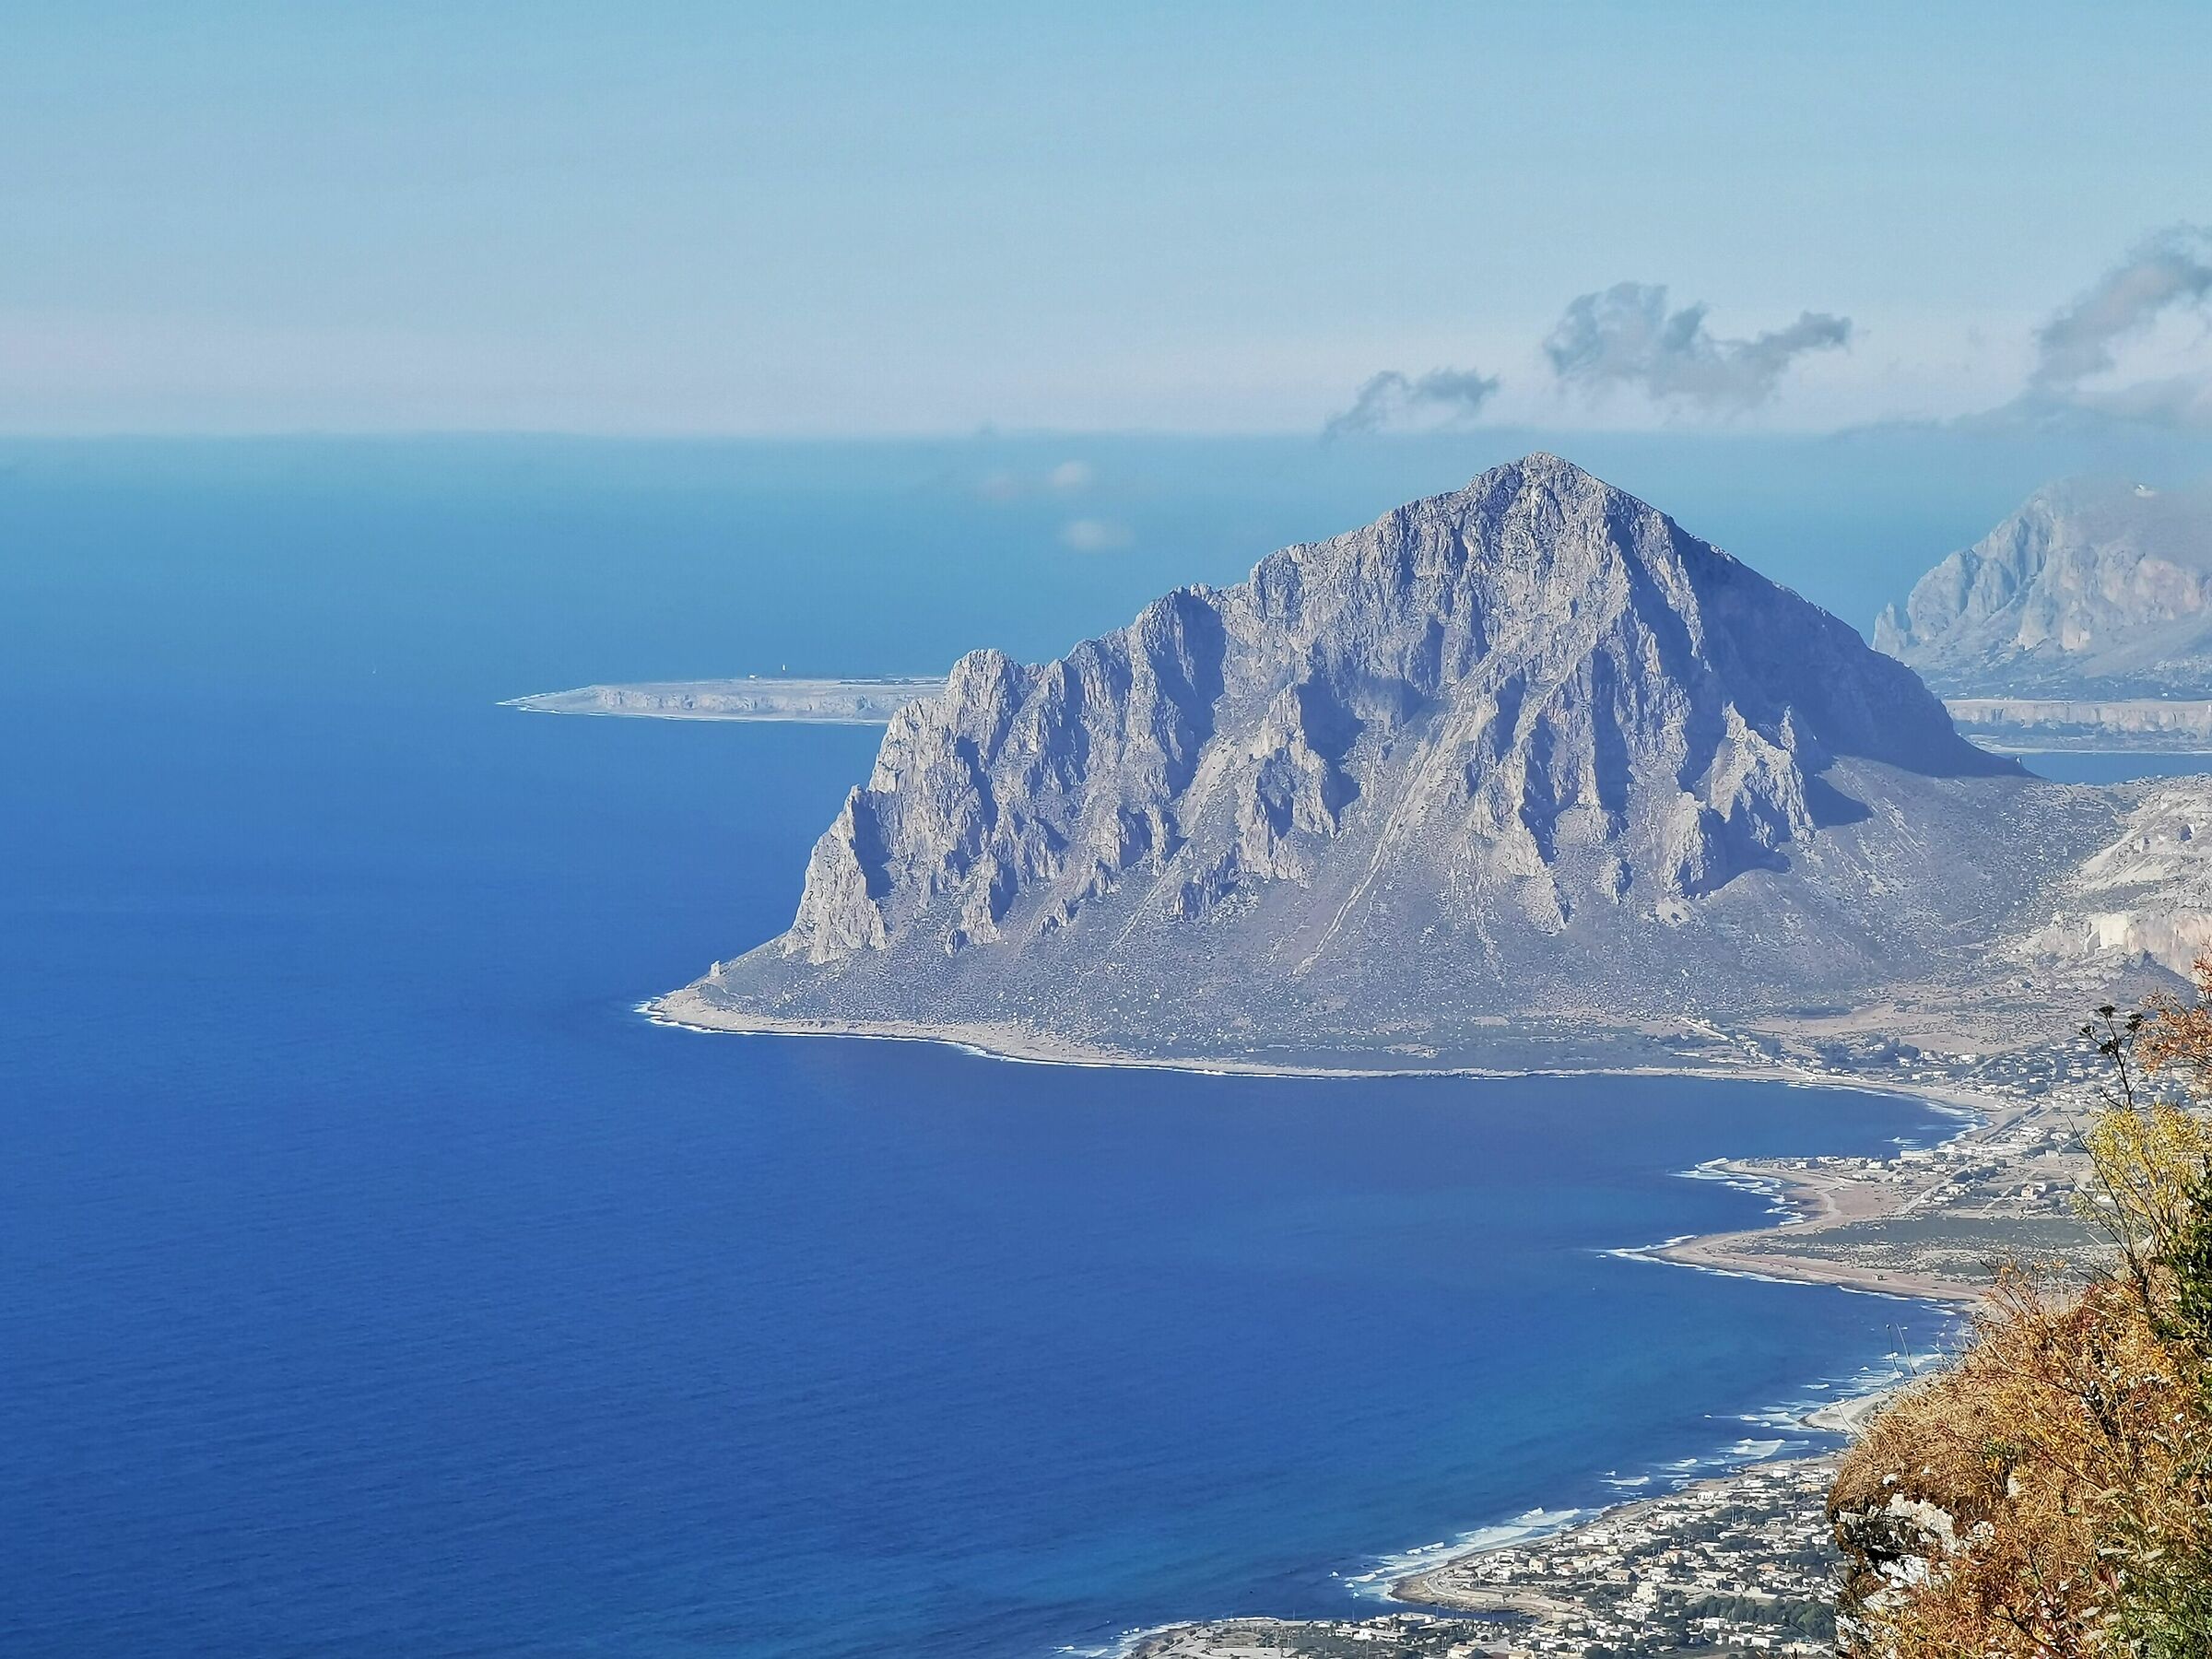 Belvedere from Erice, sea and mount Cofano. (135mm)...